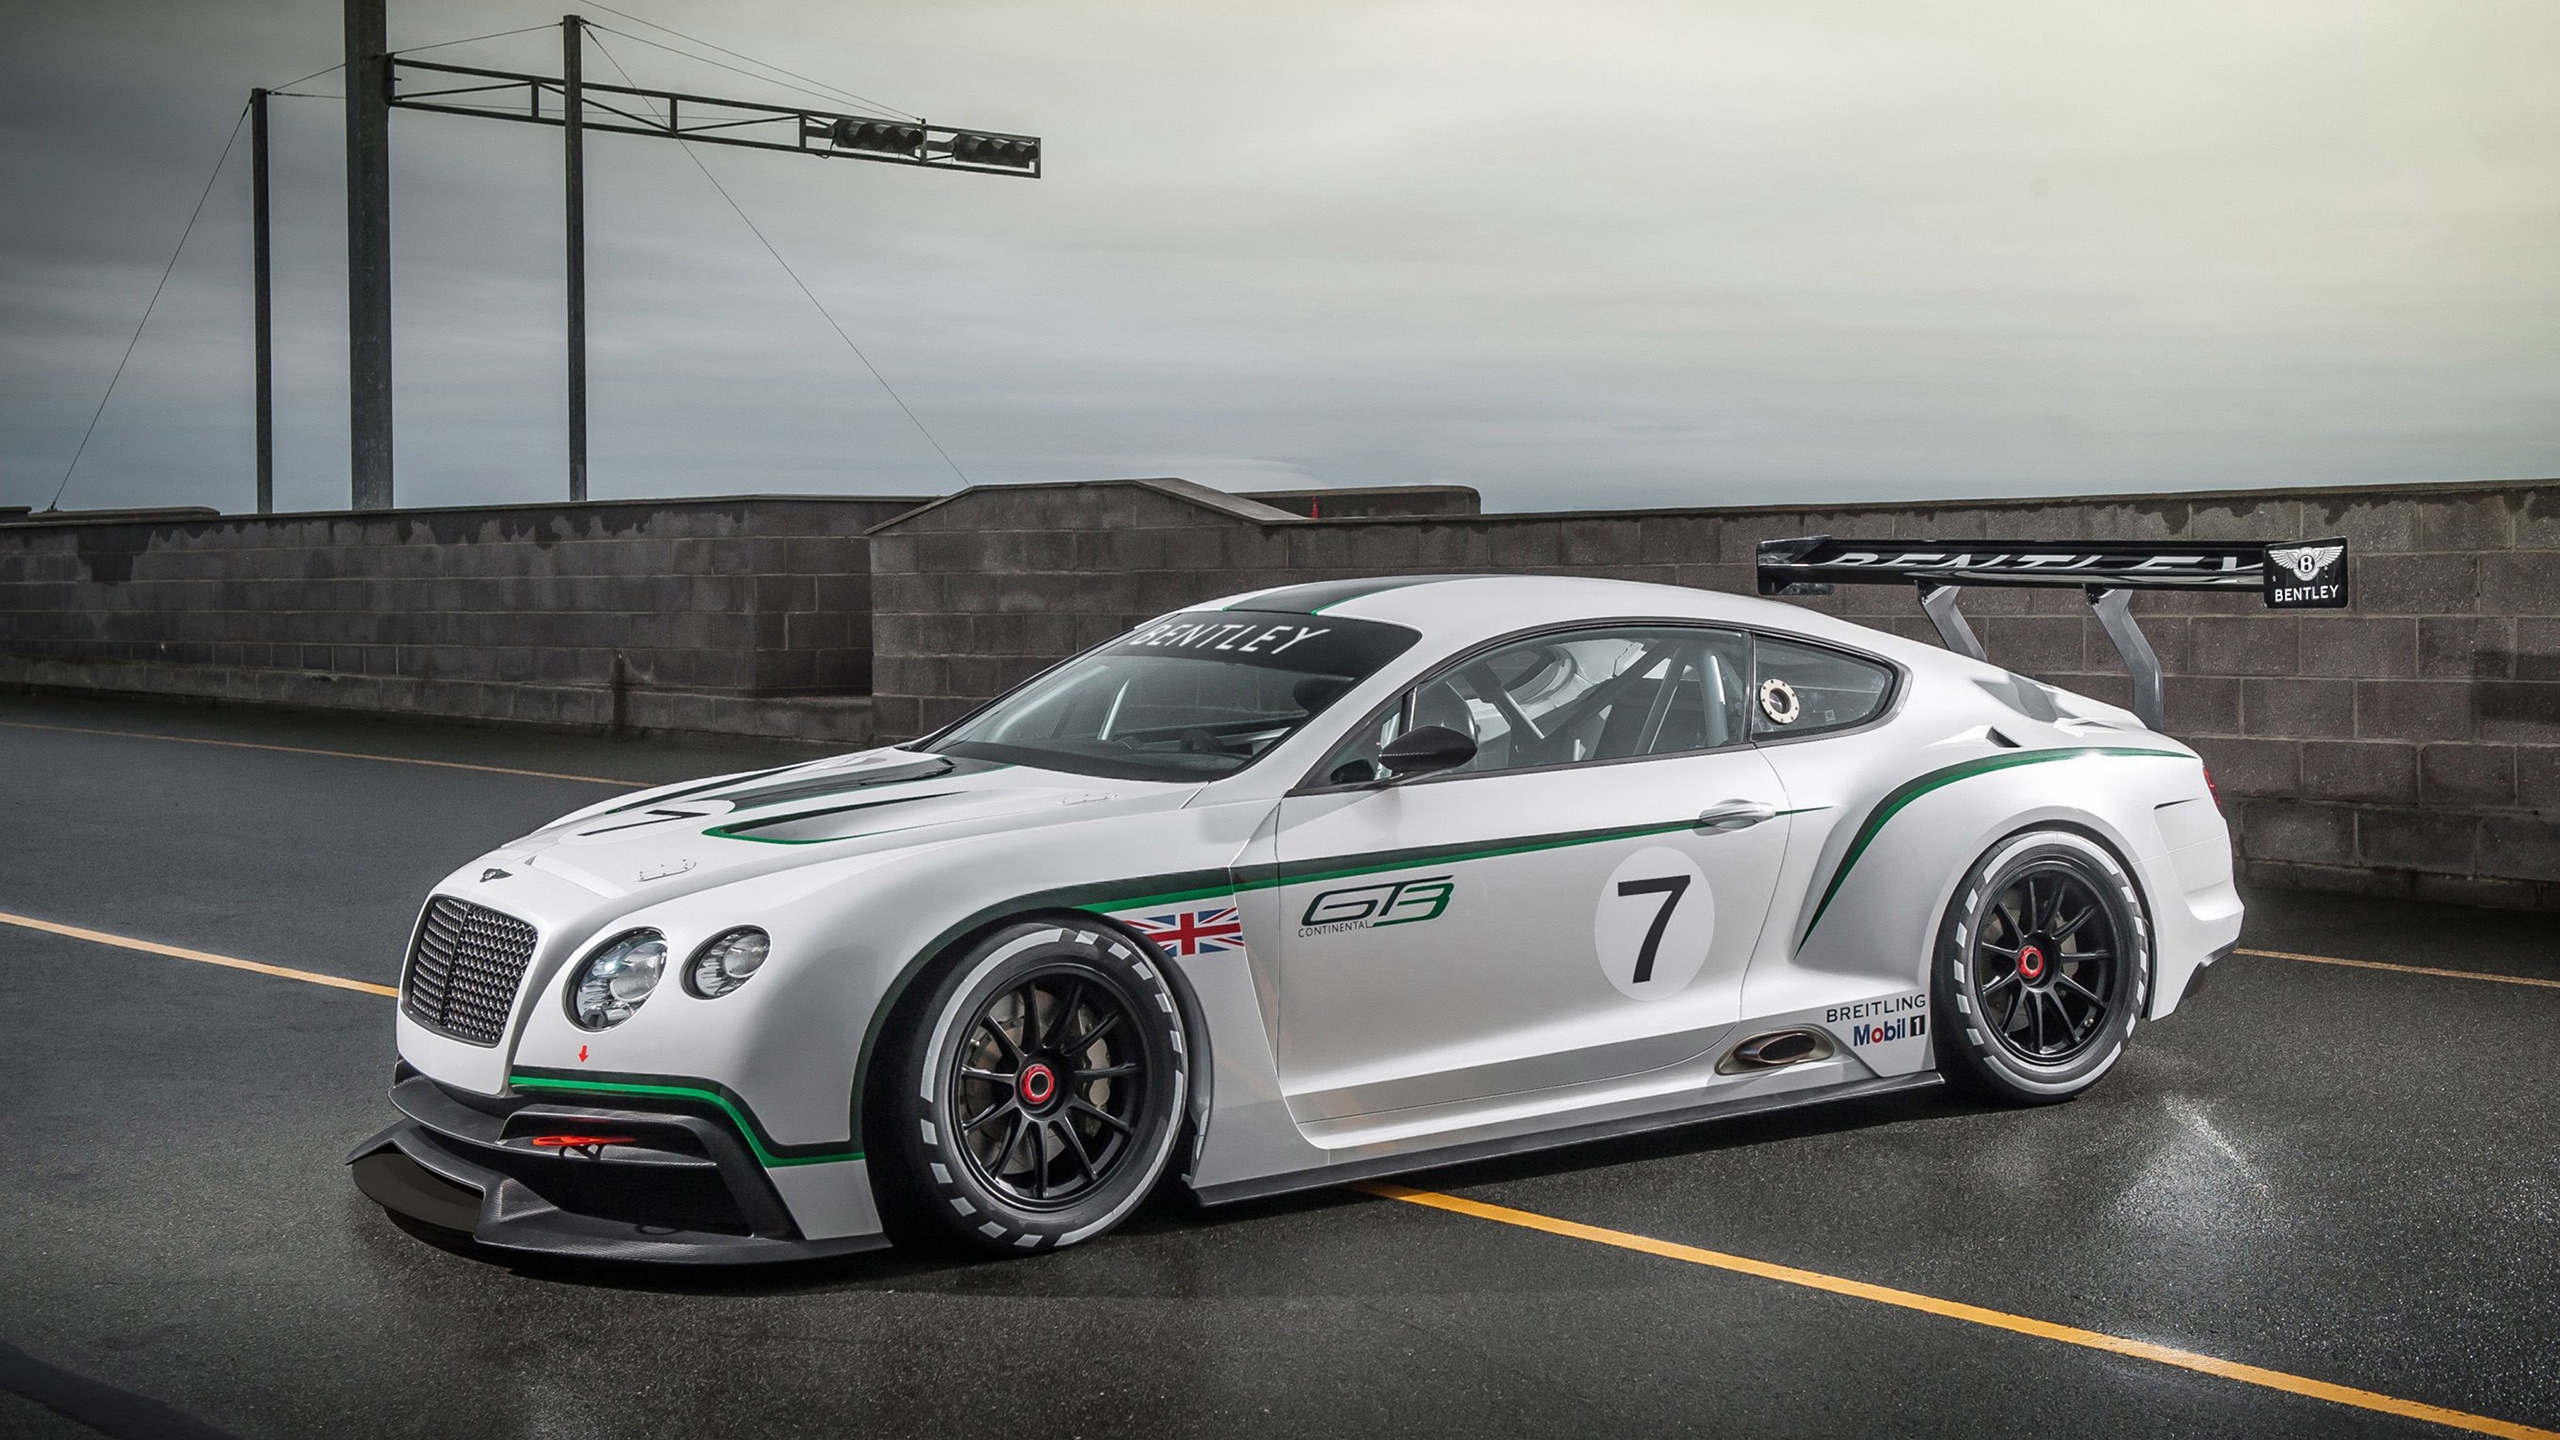 2013 Bentley Continental GT3 Concept Racer for 2560x1440 HDTV resolution